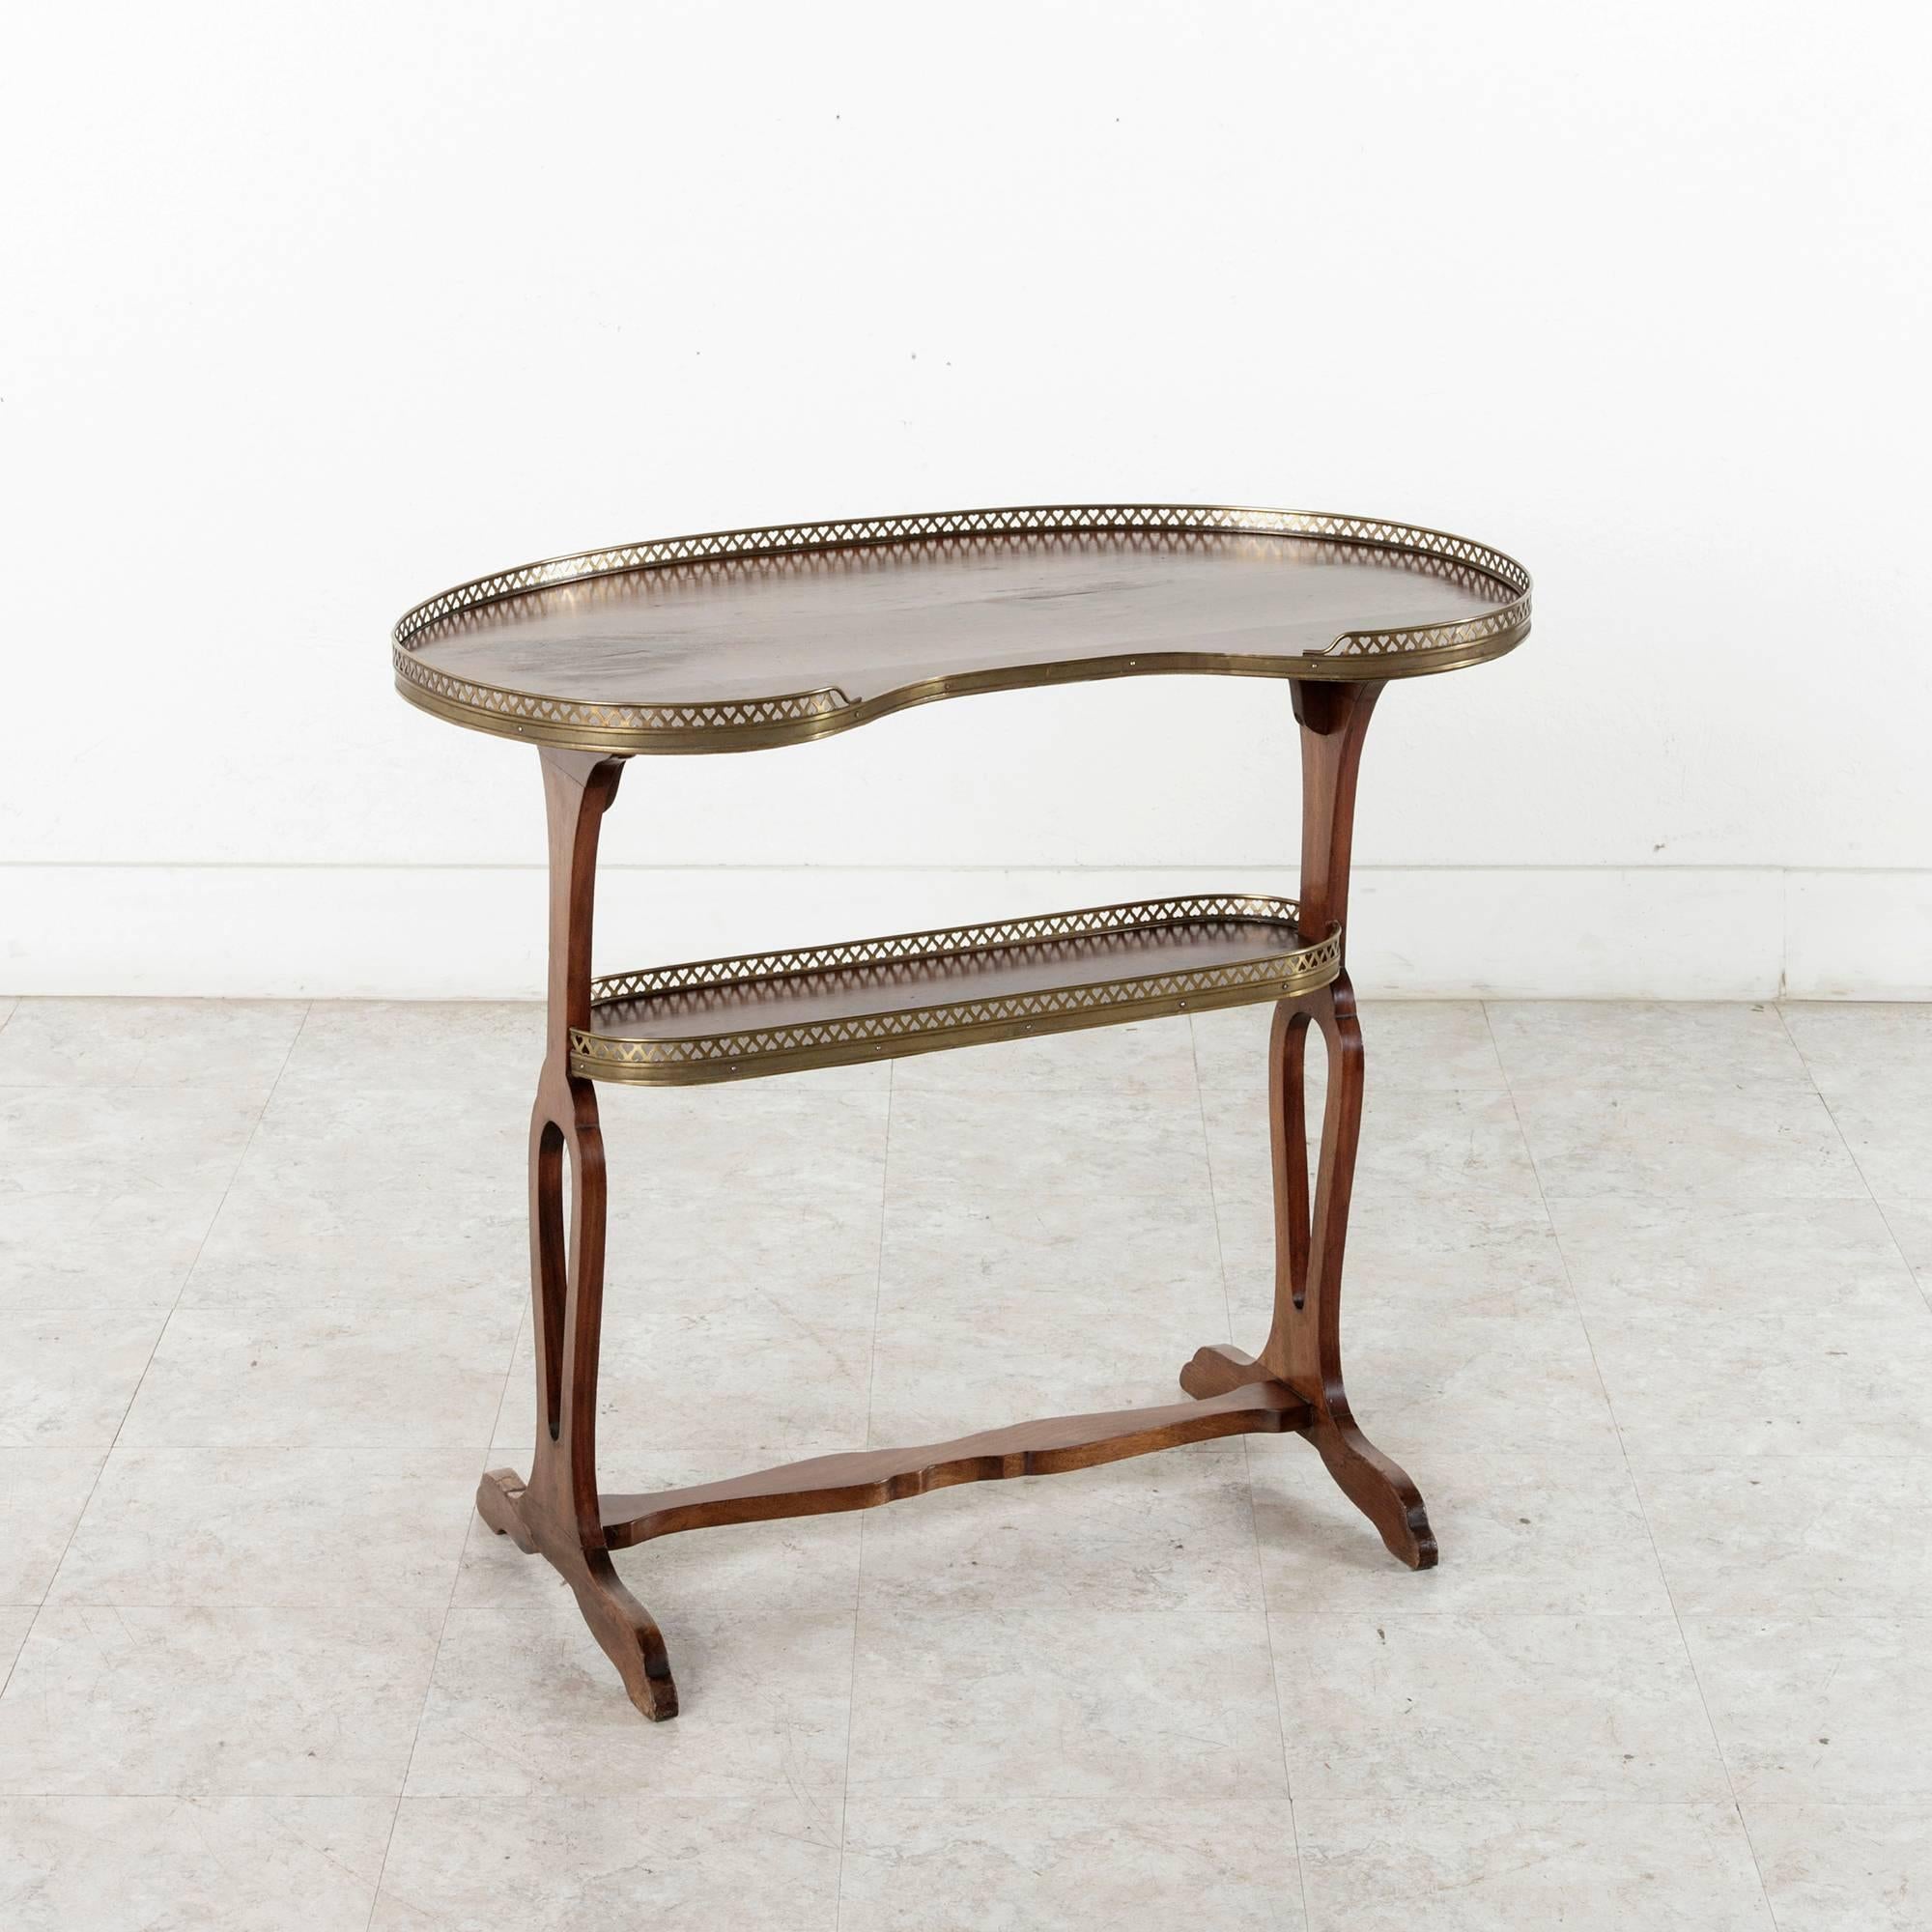 This Restauration period mahogany kidney shaped side table has simple, elegant curves and bronze galleries. Create circa 1820, this piece is of an excellent scale to hold a petite laptop or Ipad or or as a bar table.